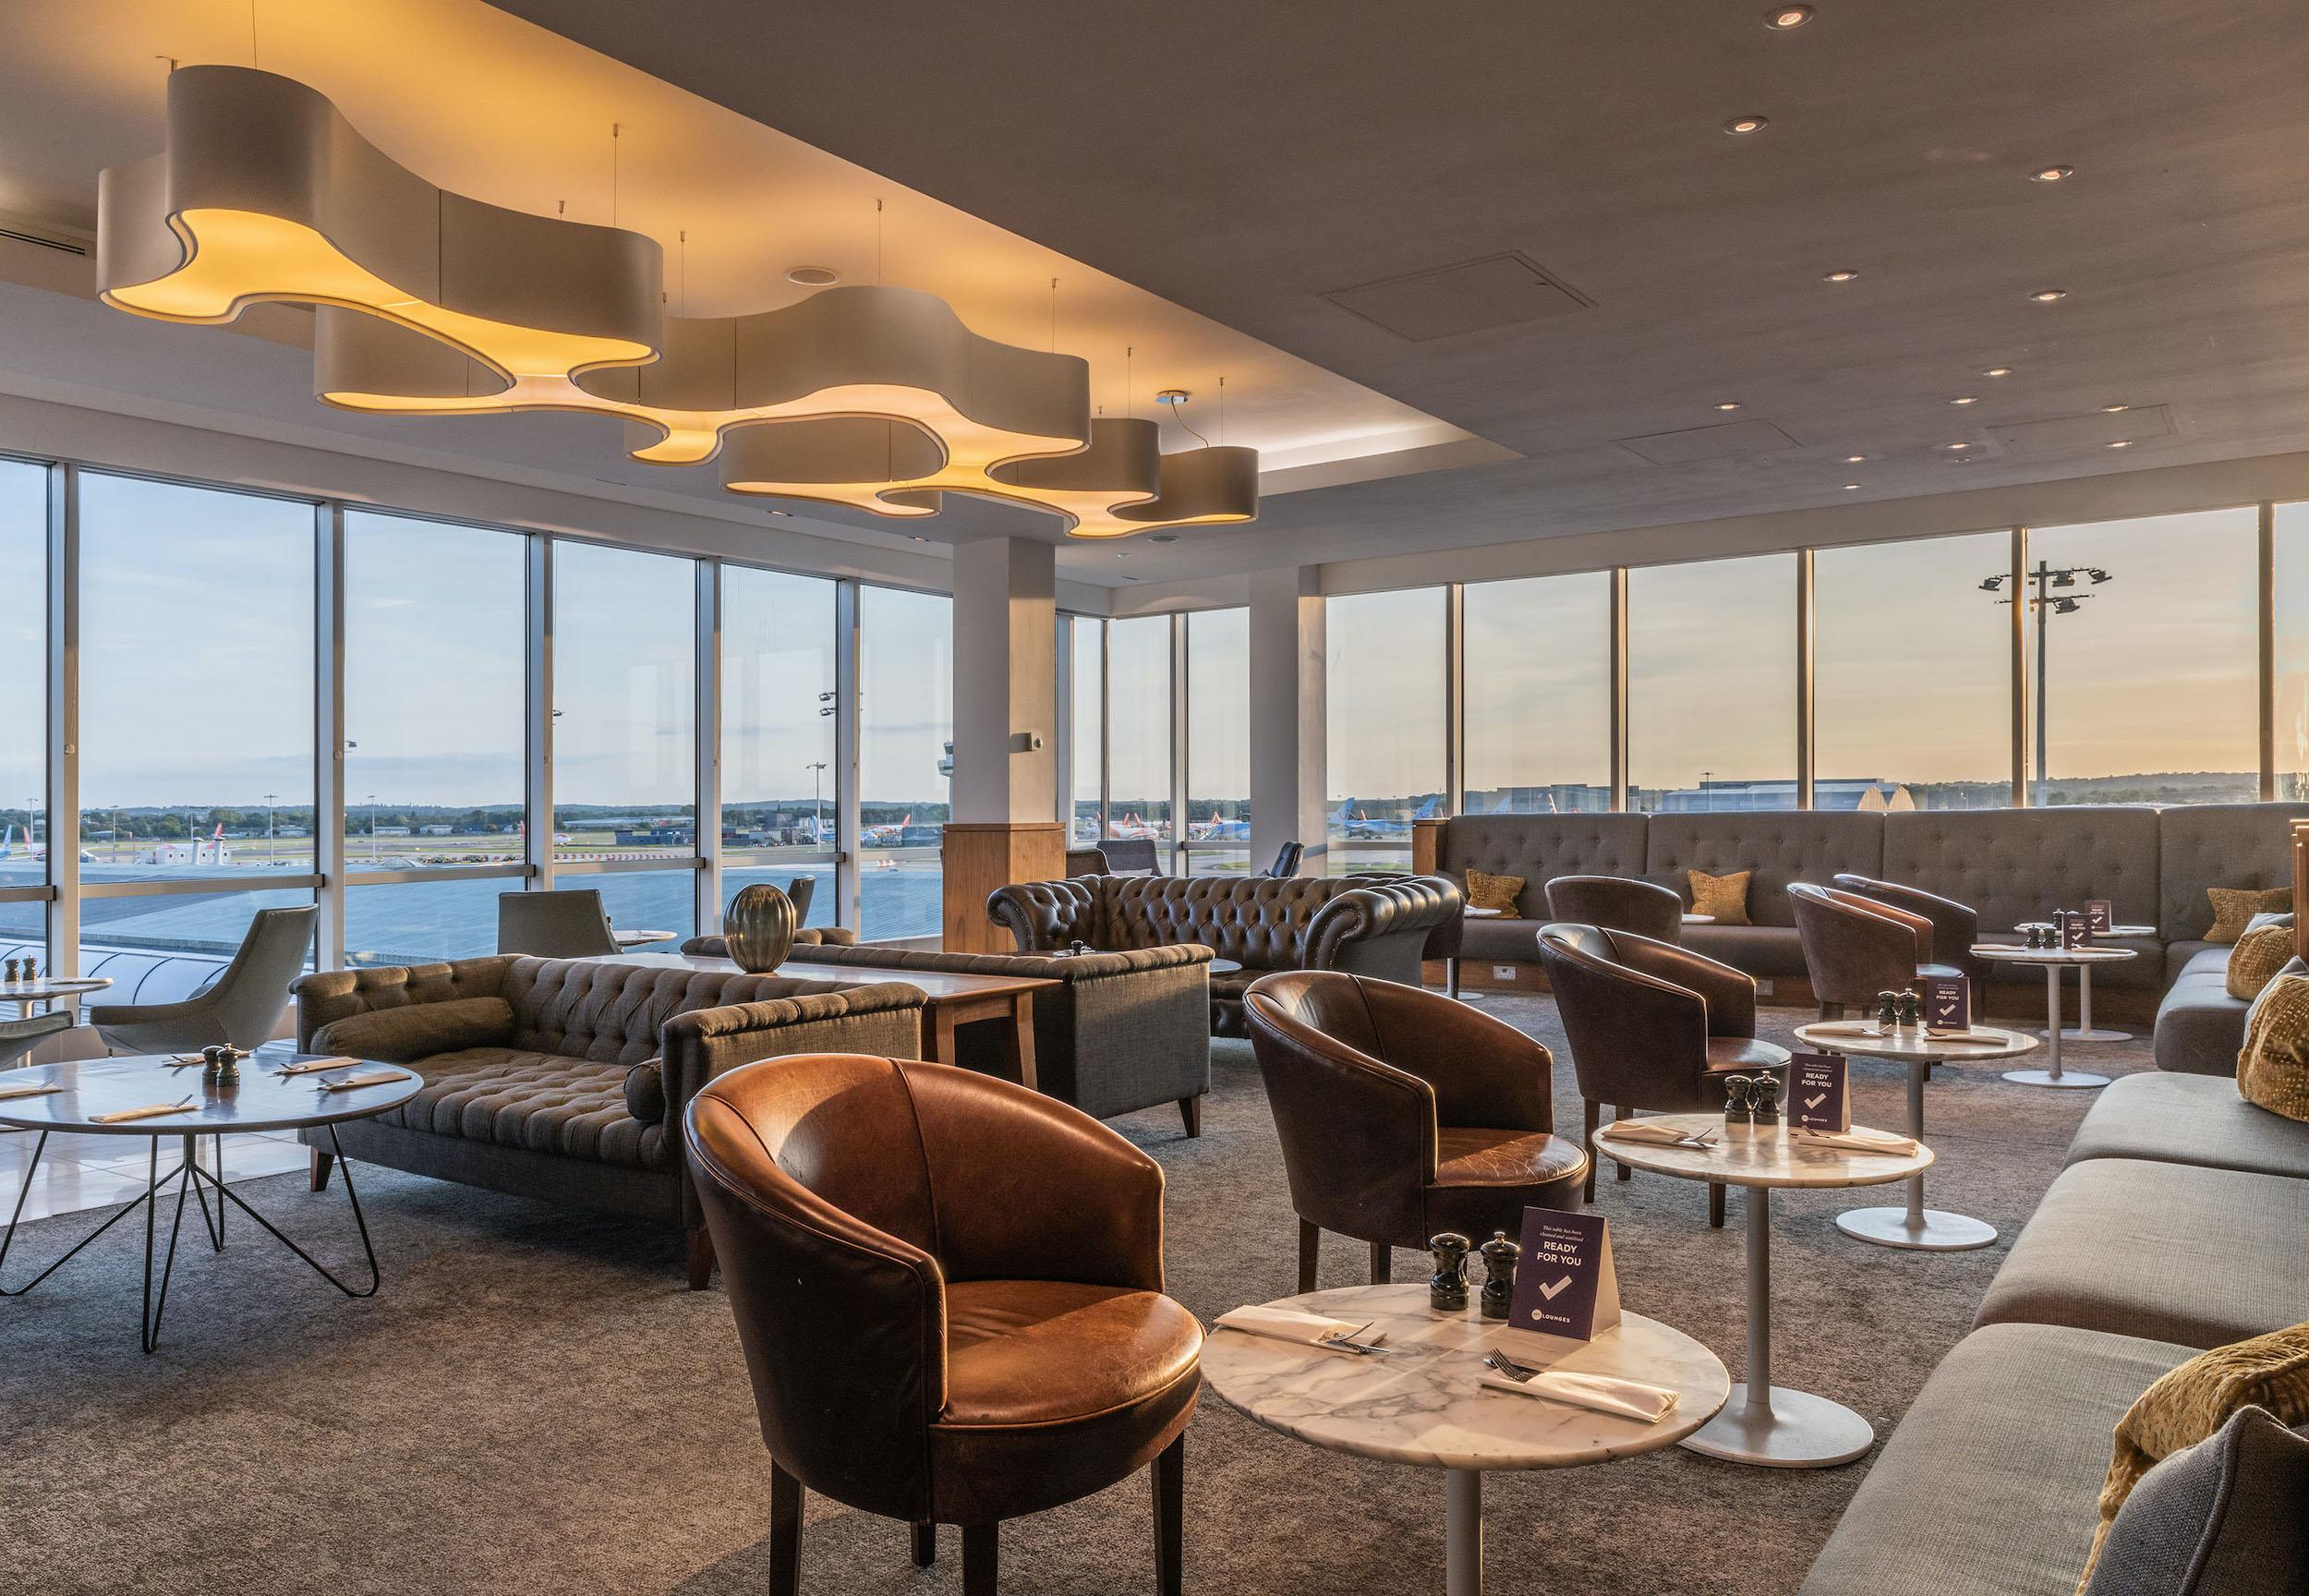 No1 Lounge at Gatwick North Daytime Seating Area (1)